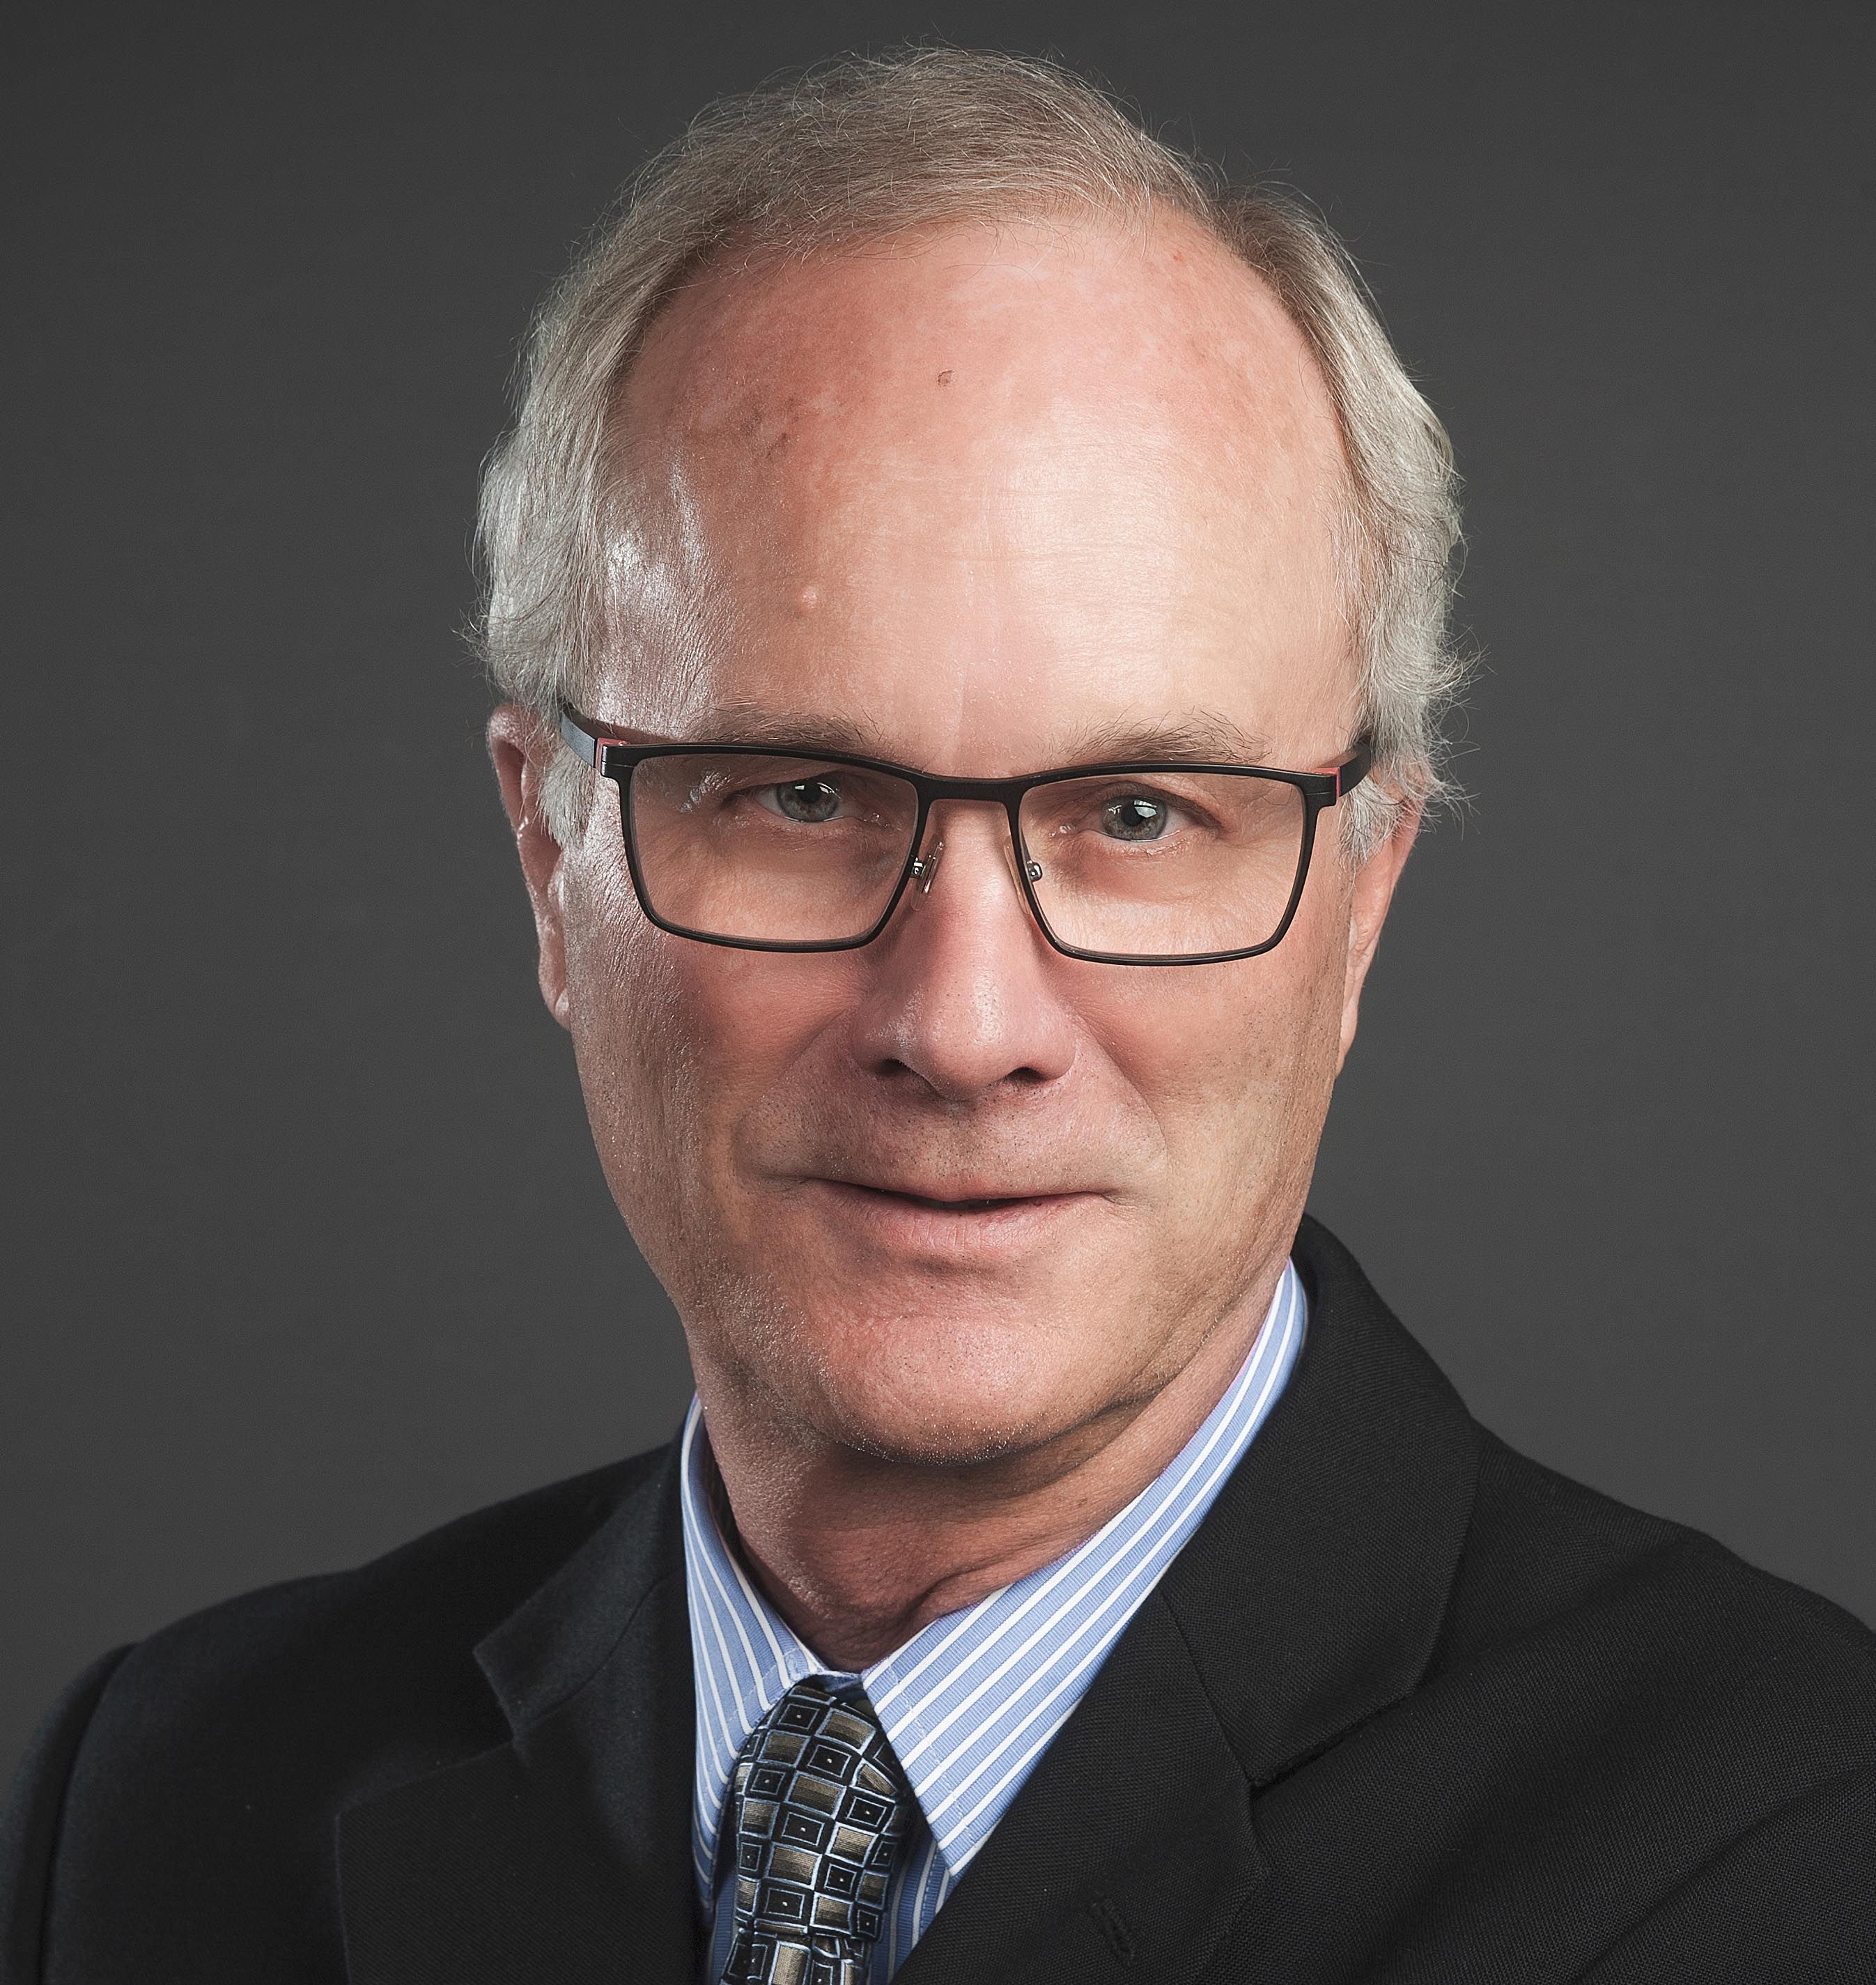 Dr. J Curtis Nickel, professor in the department of urology at Queen’s University and a urologist at Kingston and Hotel Dieu General Hospitals, Kingston, Ontario, Canada